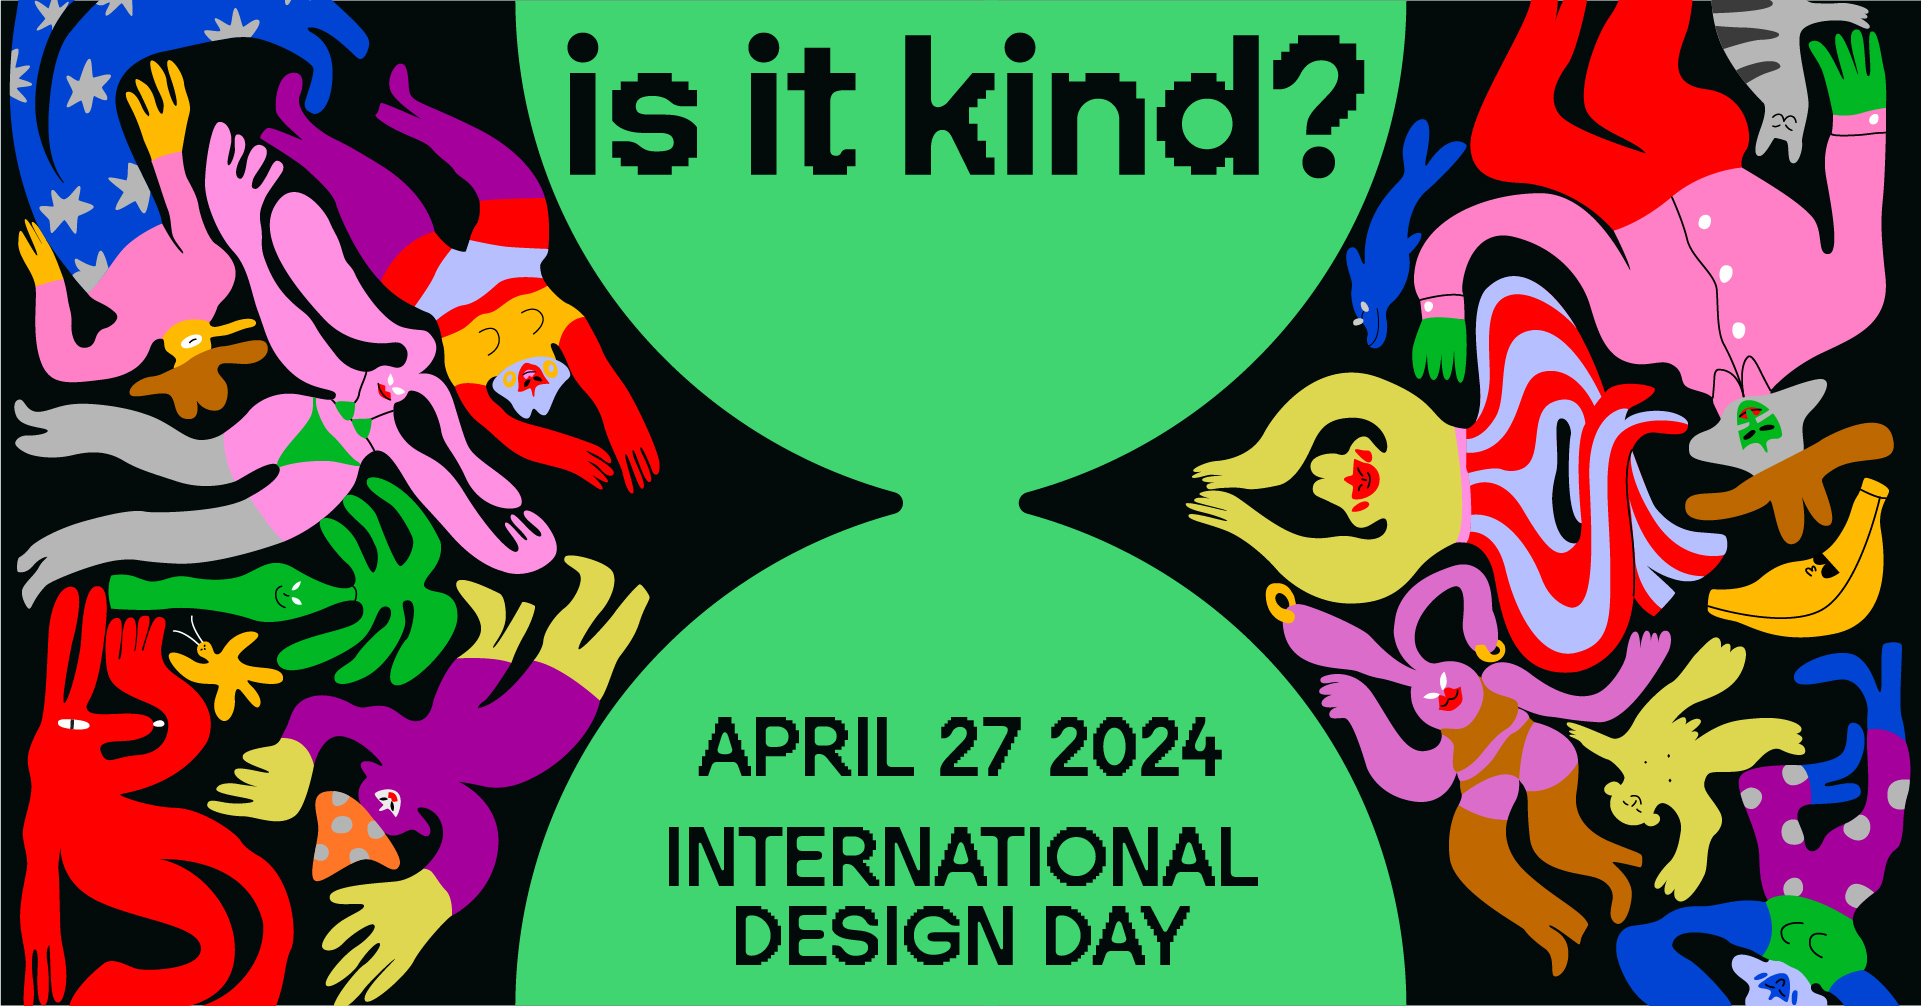 The IDD2024 visuals were designed by the illustrator Egle Zvirblyte and produced by Taktika Studio, a design practice by Nerijus Keblys and Mantas Rimkus.